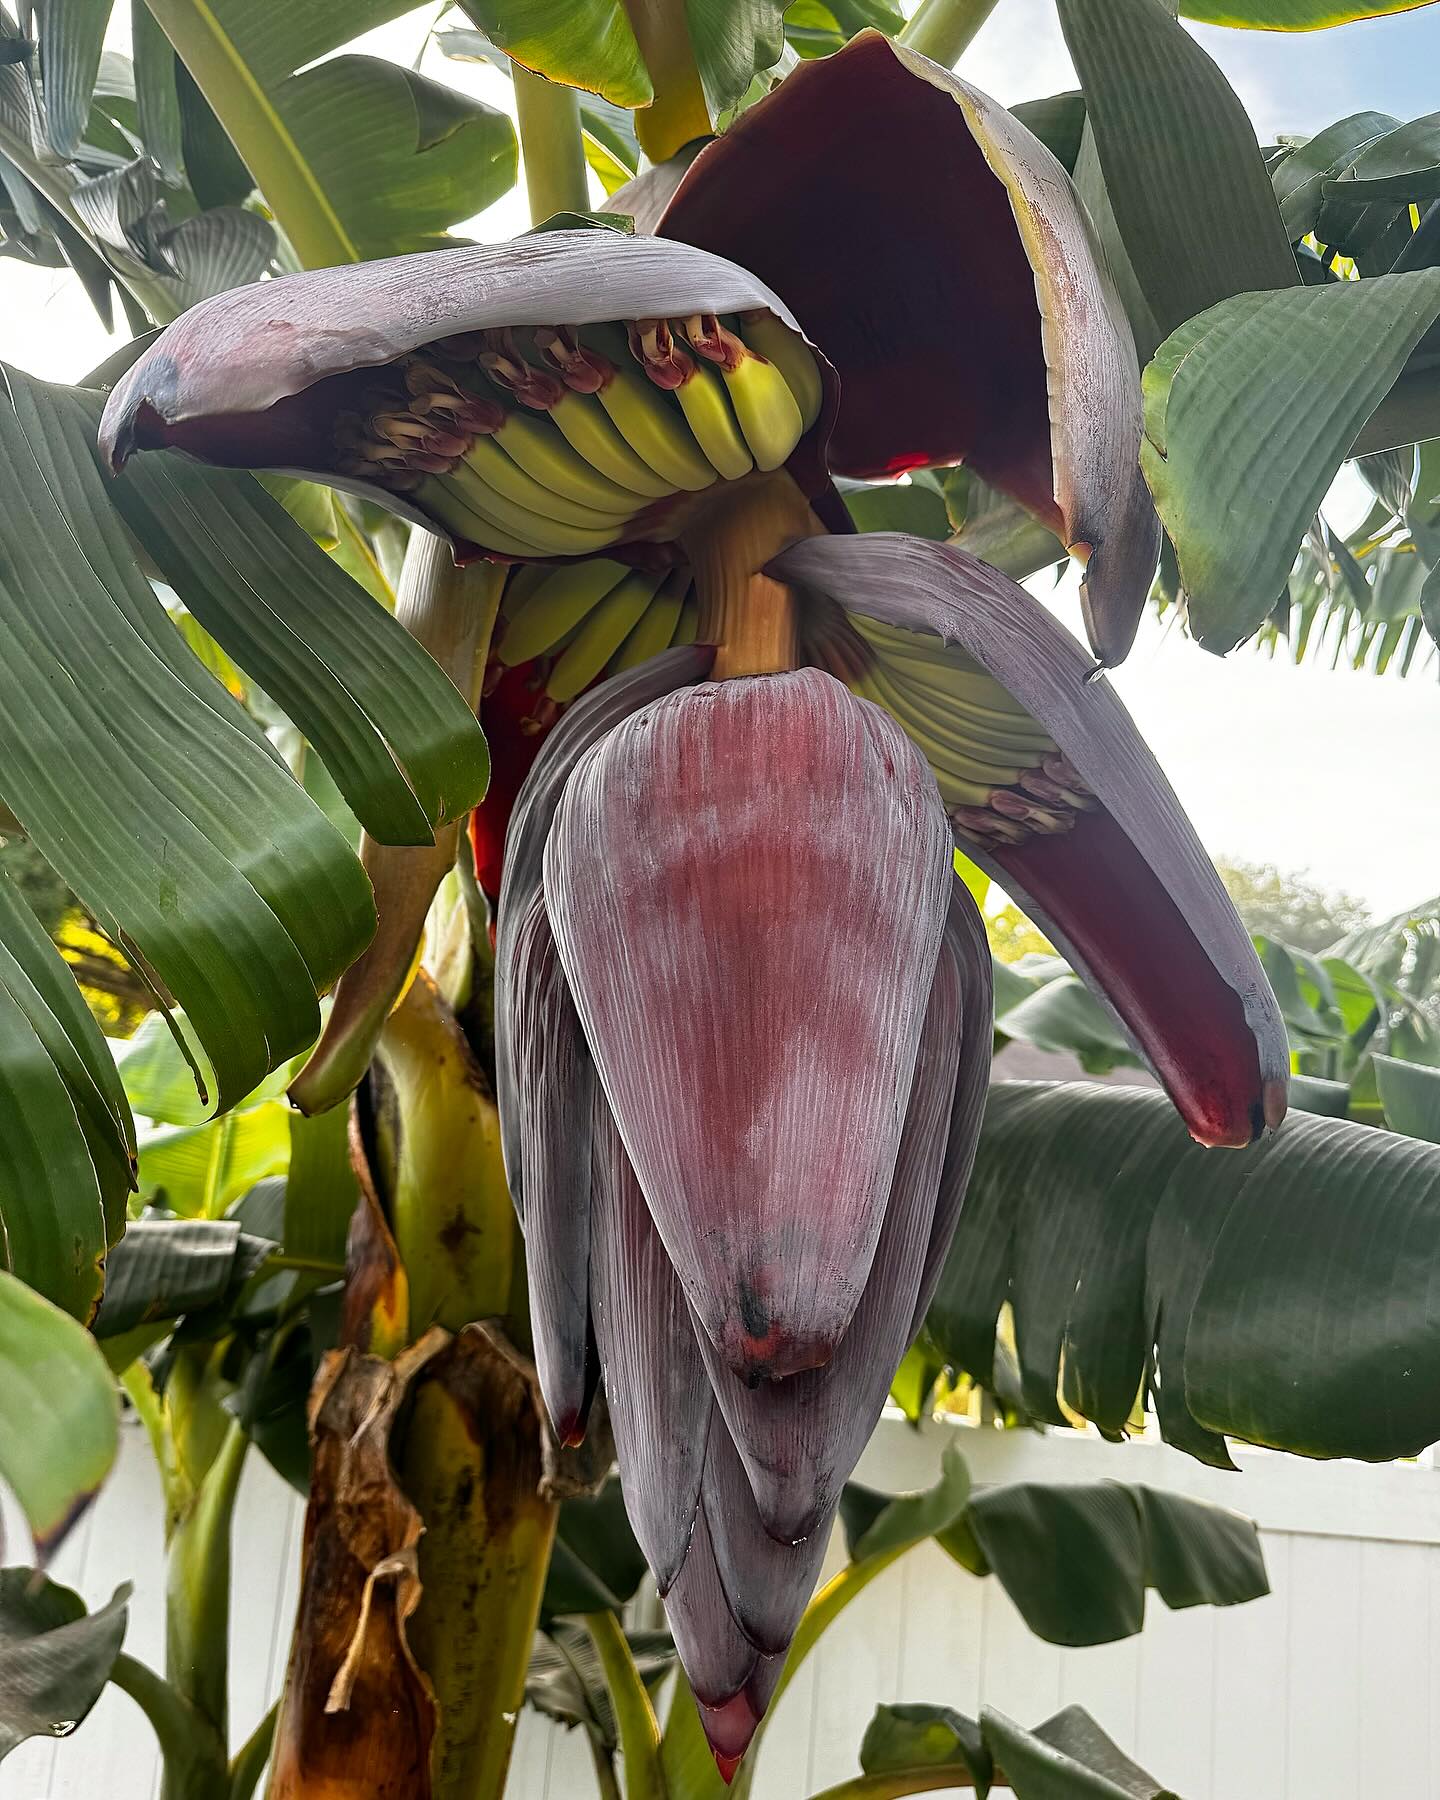 My first bananas ! 😍🍌 planted this Dwarf Nam Wah banana tree a few years ago and im so excited to see my first ever fruits starting to pop out! The banana clusters are tucked under each ‘hand’ (layer) and if everything goes to plan, this head will give me well over 100 bananas 😳 supposedly they have a sweet taste with tropical notes of pineapple & mango, can’t wait to try them 😍 #banana #tree #florida #homestead #gardening